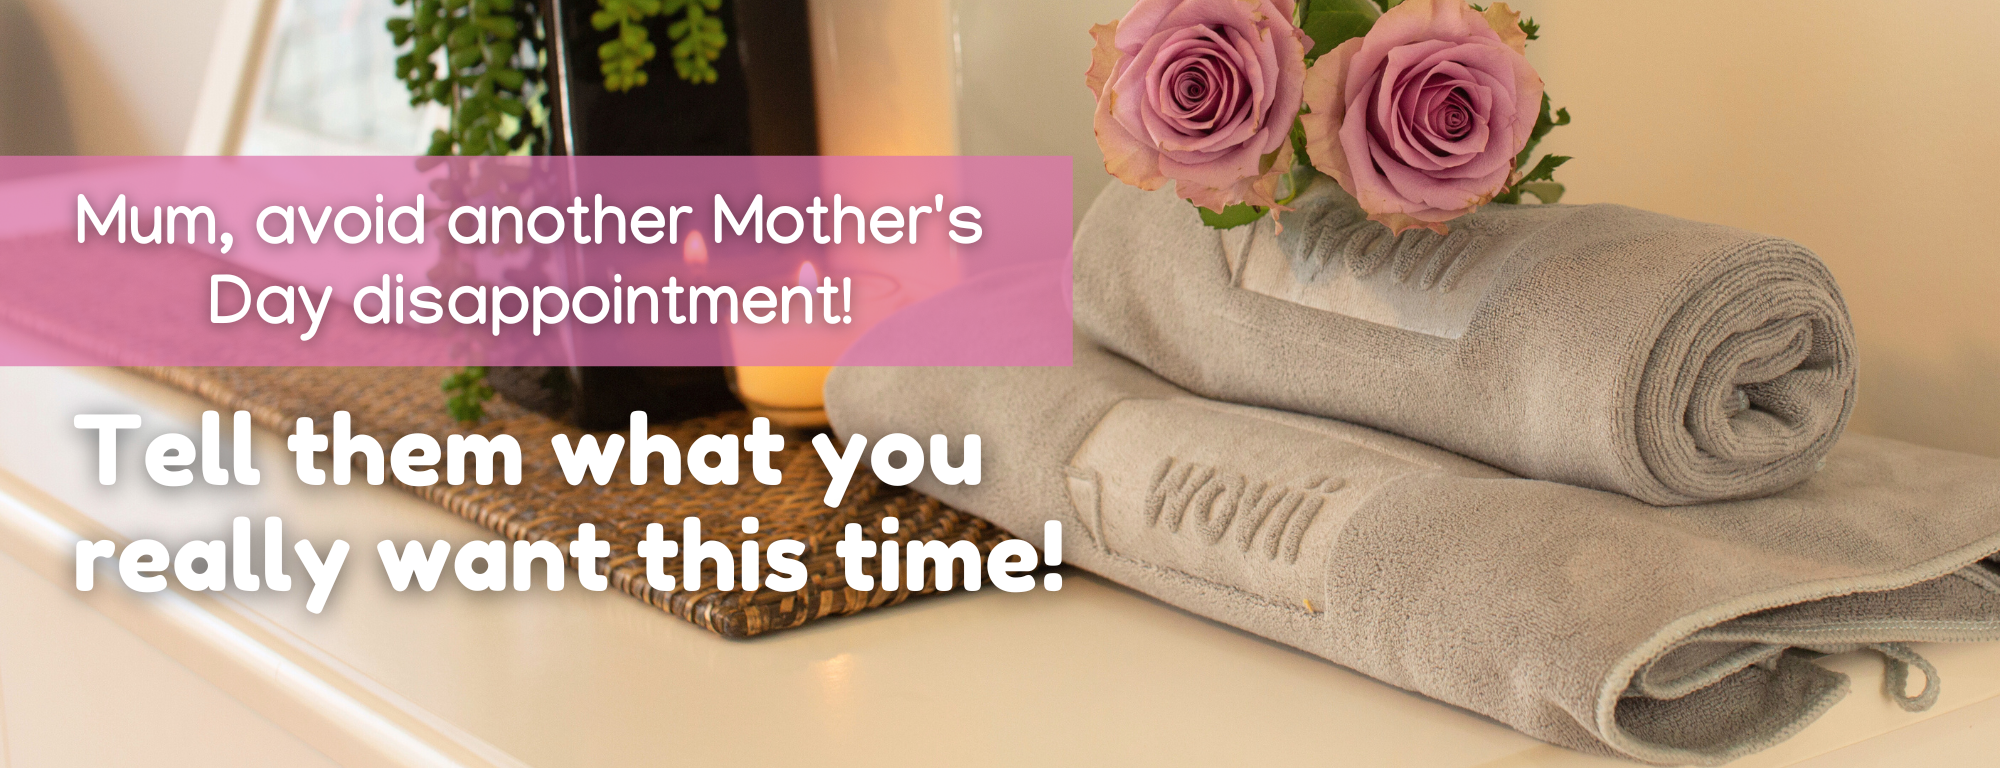 Mothers day promo towels with flowers